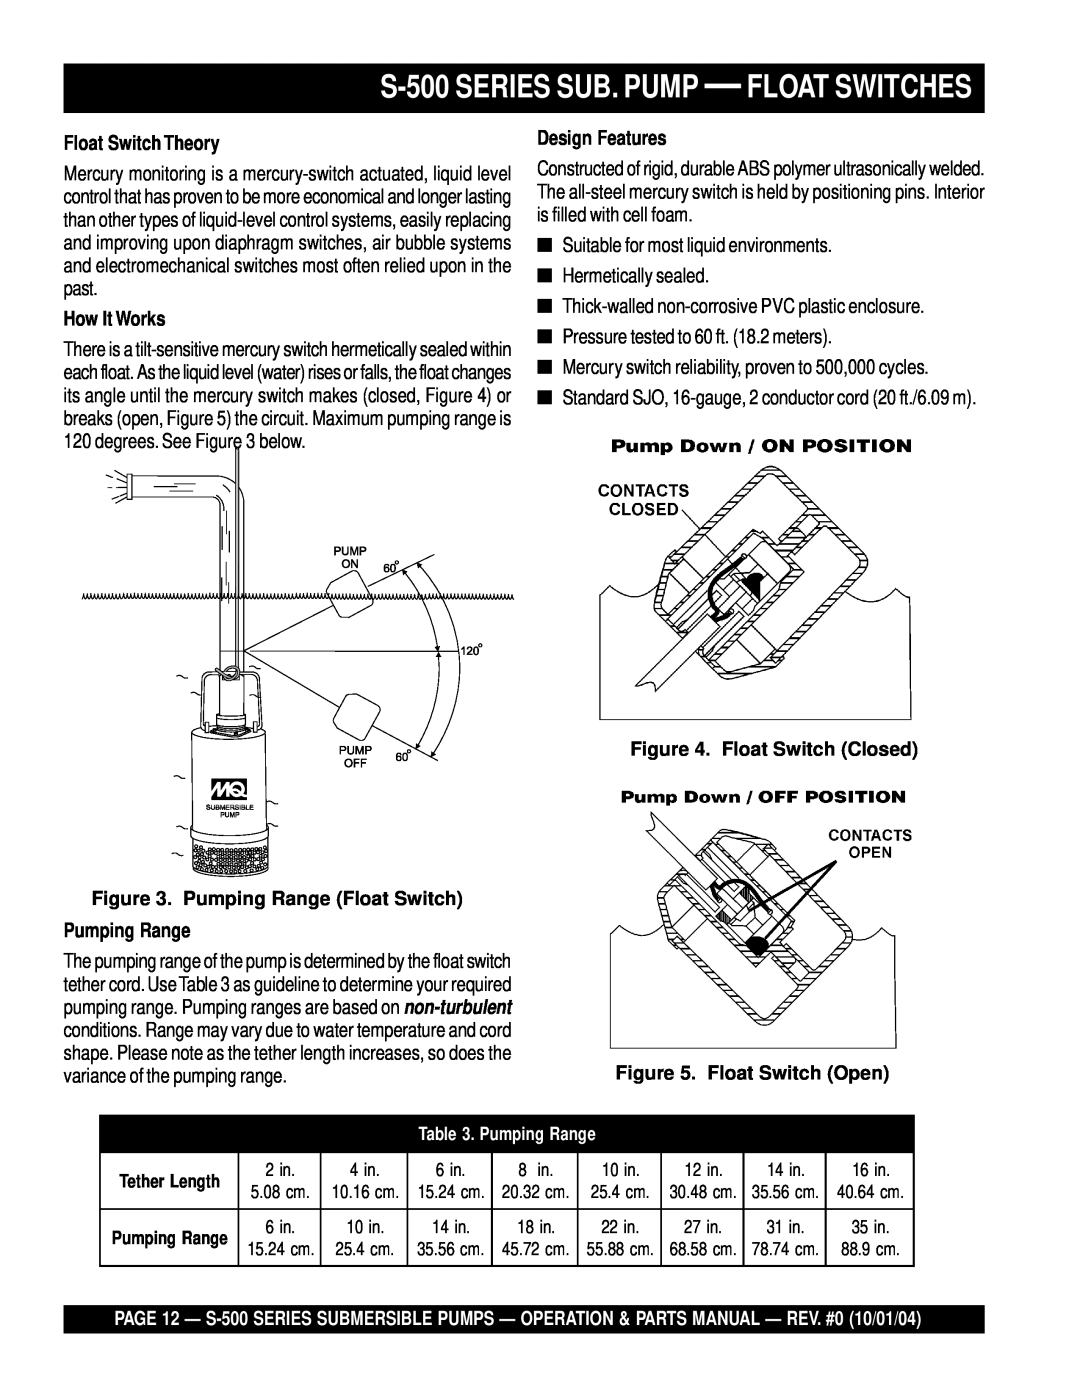 Multiquip manual S-500SERIES SUB. PUMP - FLOAT SWITCHES, Float Switch Theory, How It Works, Pumping Range Float Switch 